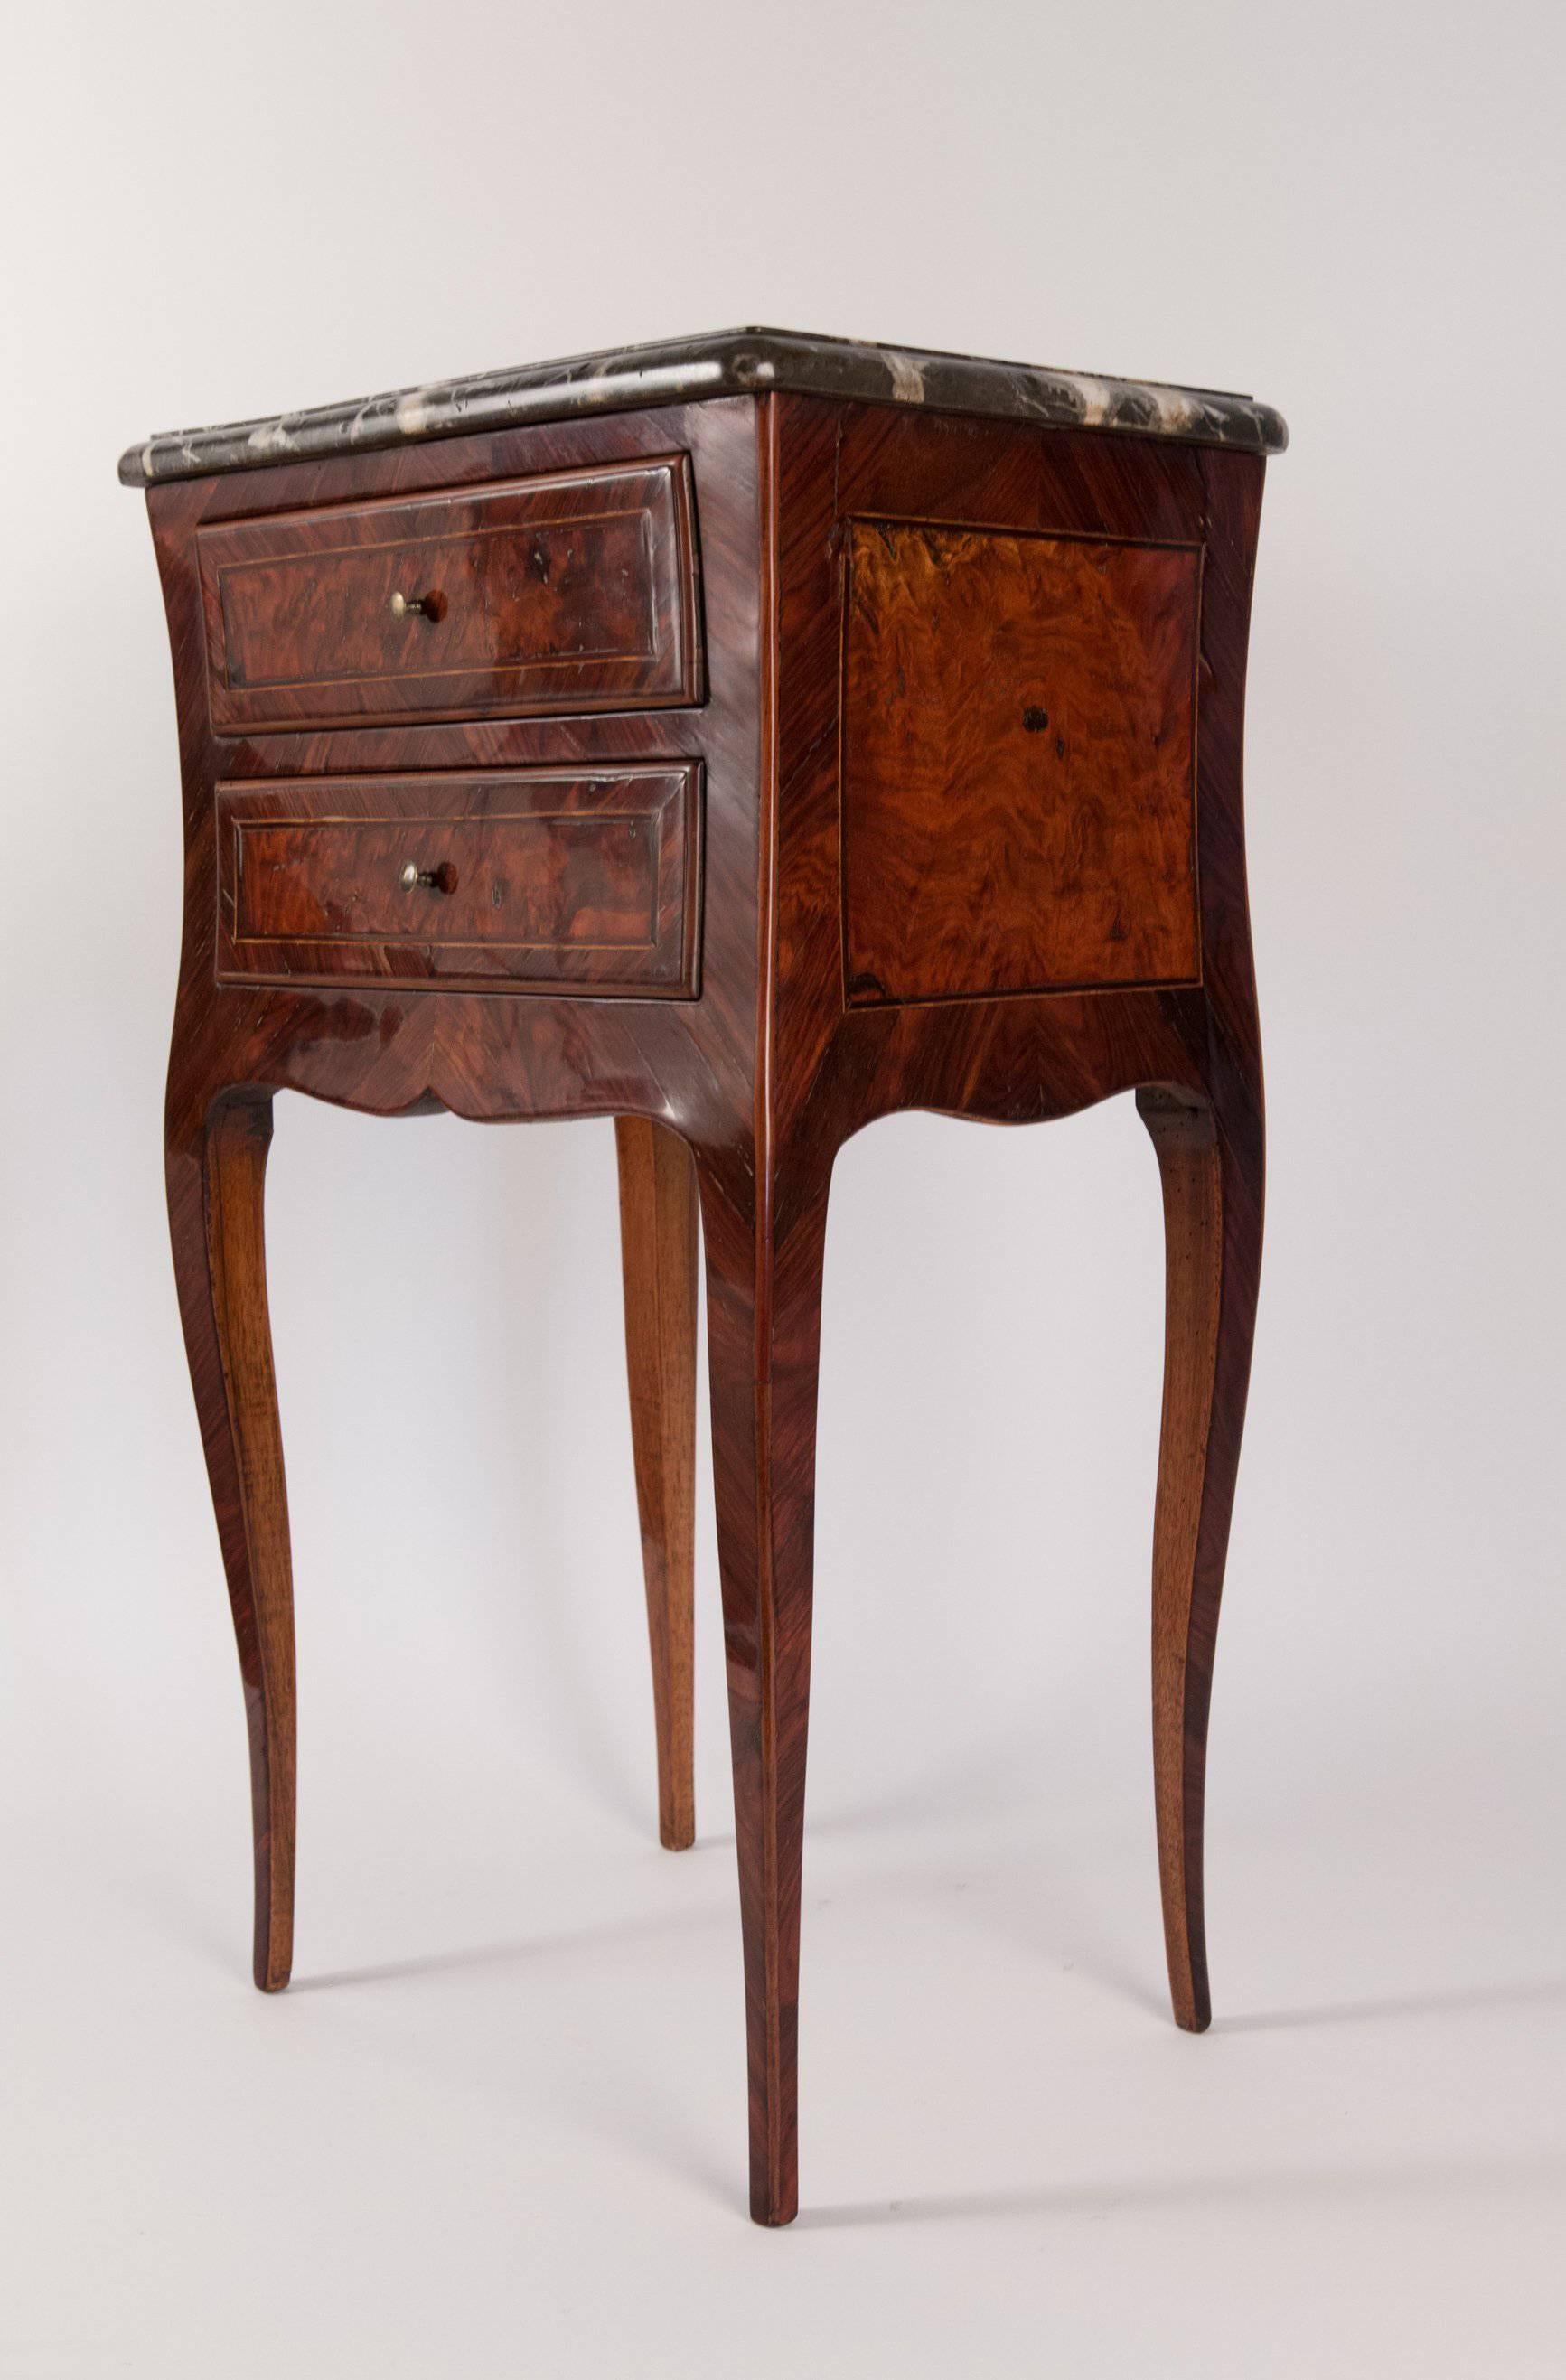 19th Century French Small Louis XV Style Serpentine Commode with Marble Top, circa 1820-1830 For Sale